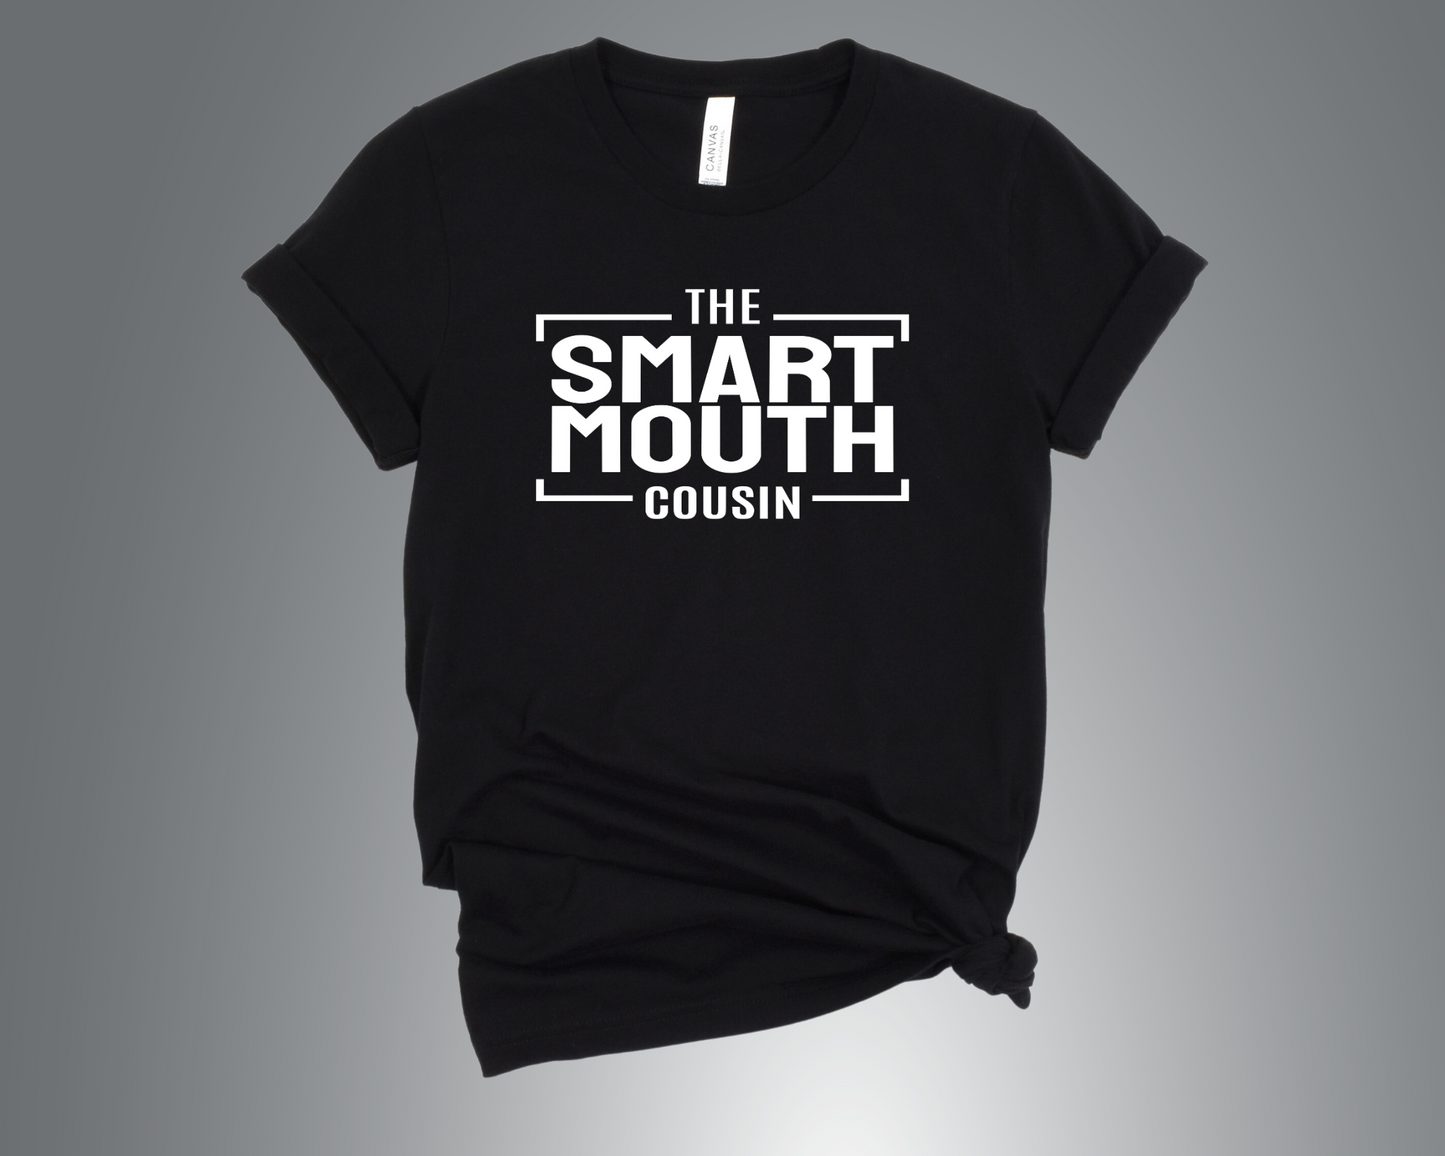 The Smart Mouth Cousin - T-Shirt